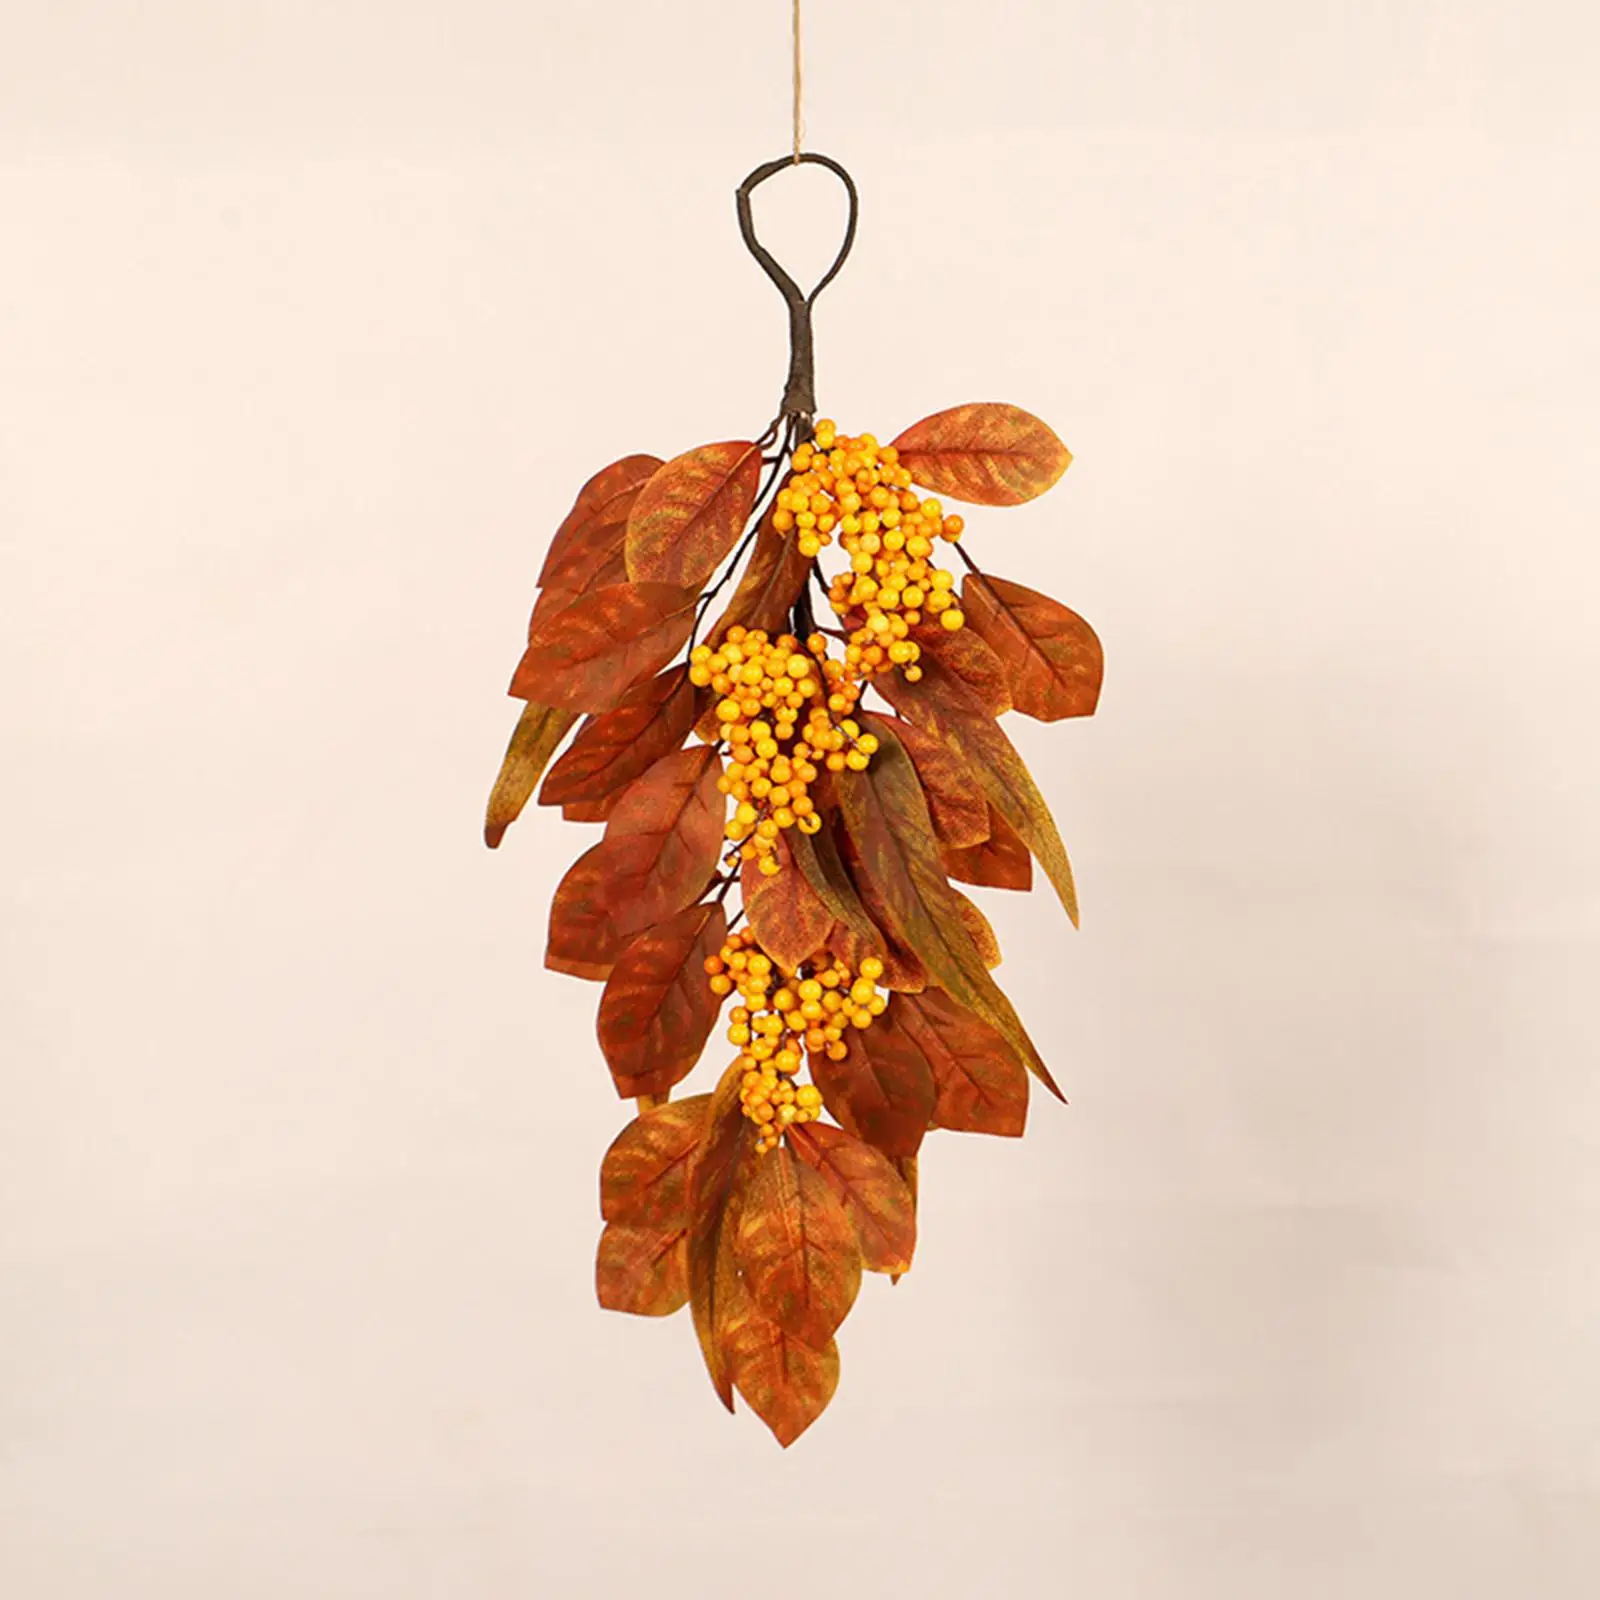 Artificial Wall Hanging Leaves Fall Wreath Fireplace Home Door Living Room